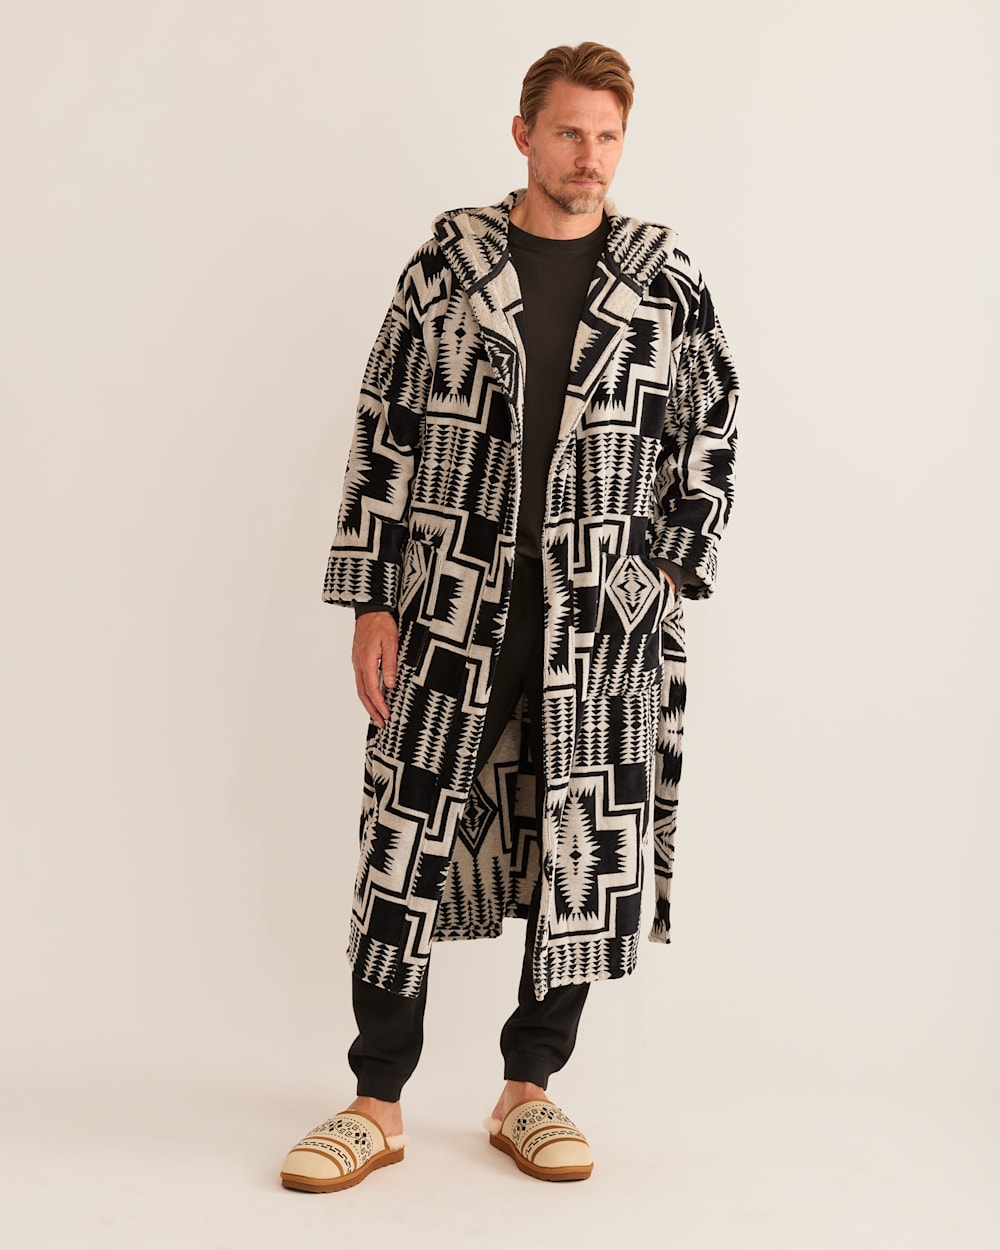 ALTERNATE VIEW OF UNISEX COTTON TERRY VELOUR ROBE IN BLACK/WHITE HARDING image number 4